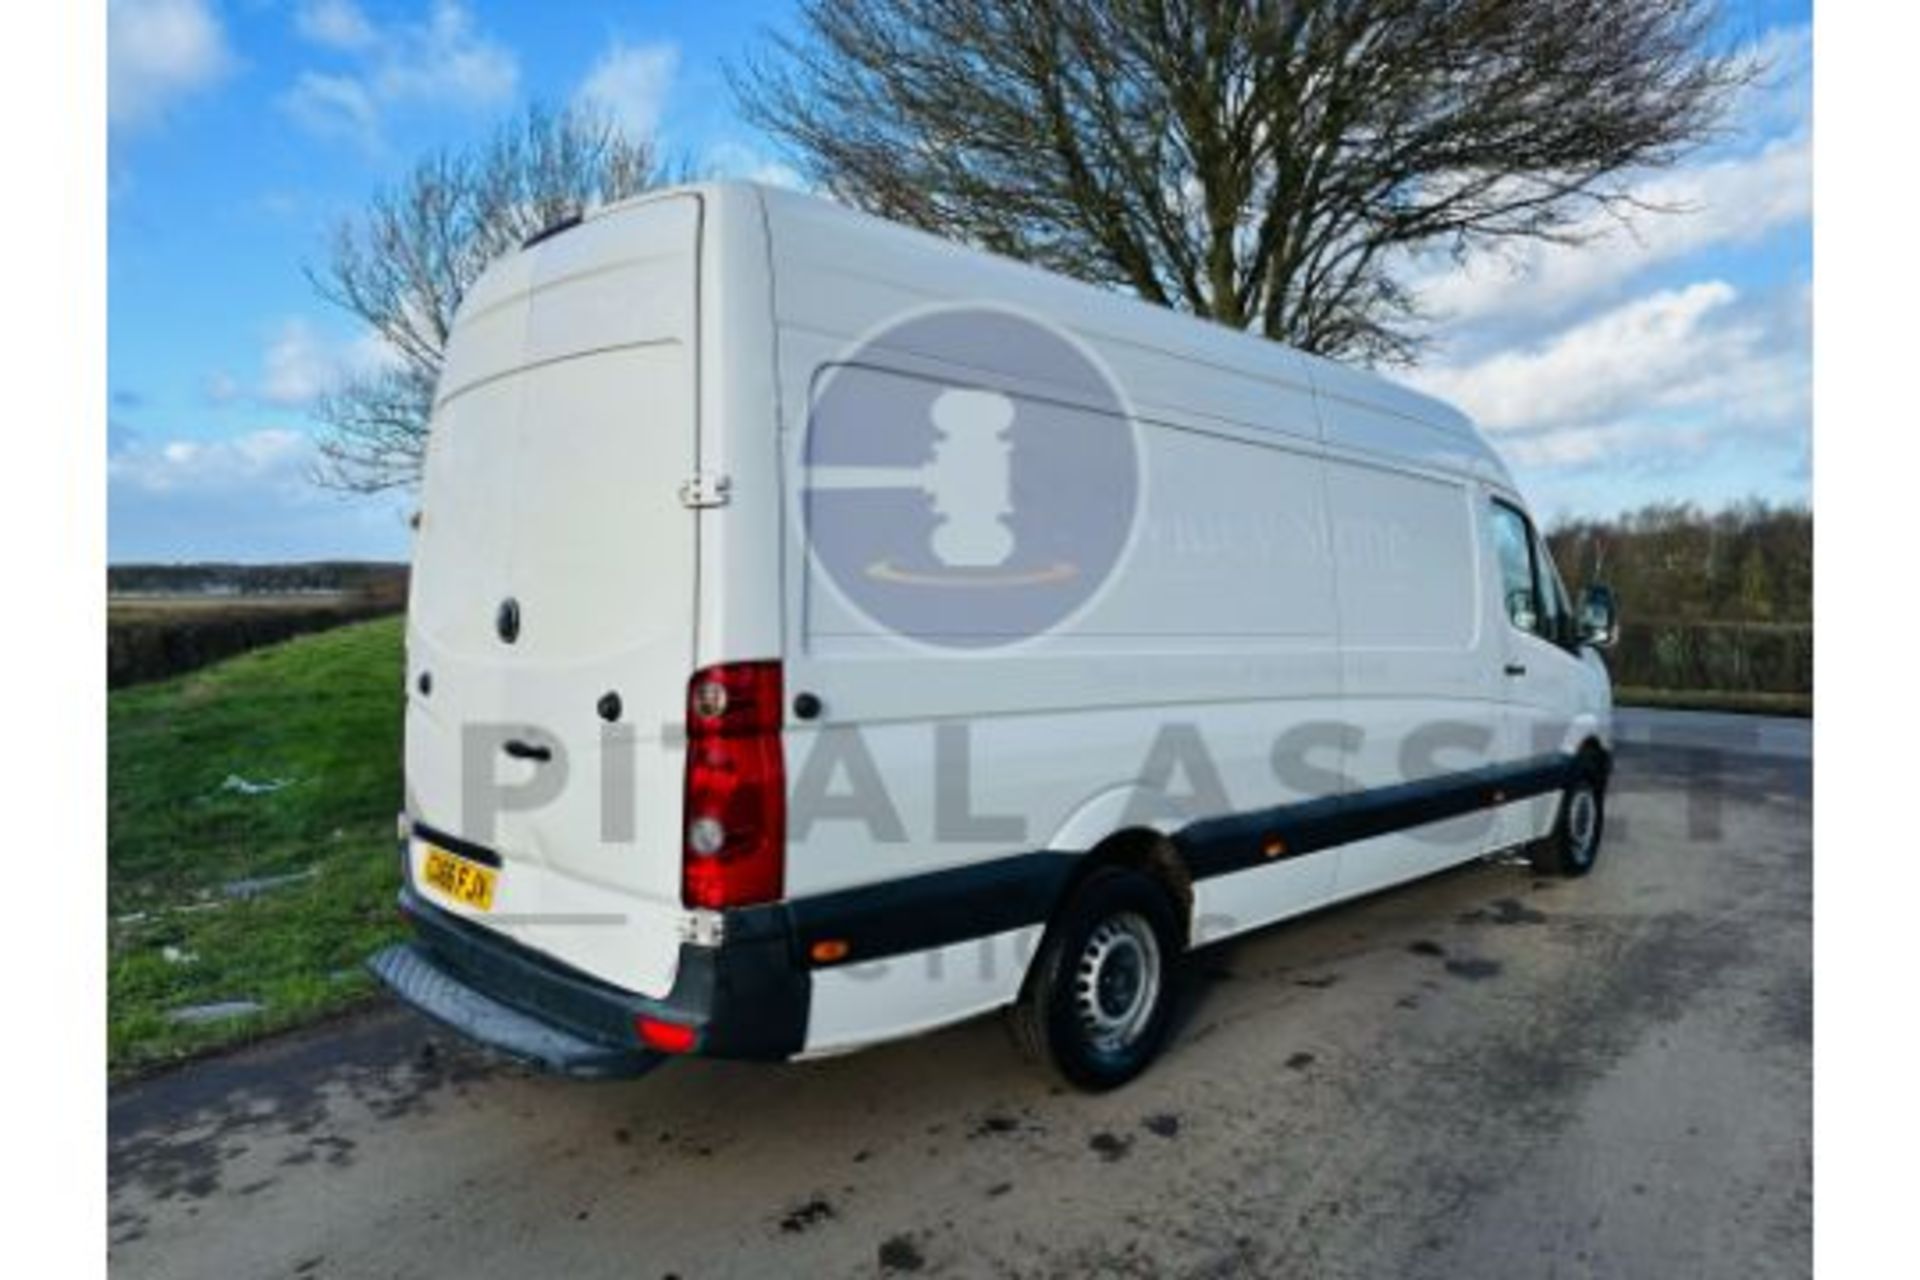 (ON SALE) VOLKSWAGEN CRAFTER 2.0TDI (140) LONG WHEEL BASE - 2017 REG - EURO 6 - AIR CON - LOOK!! - Image 8 of 31